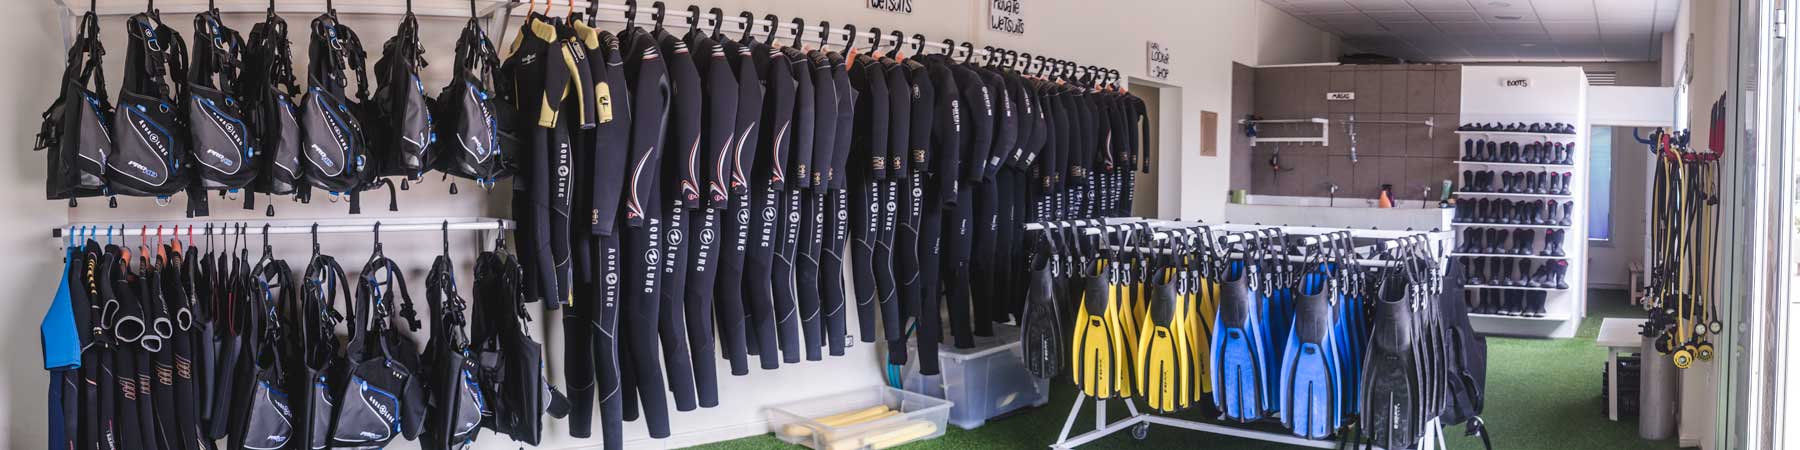 Equipment room of the Dive Center